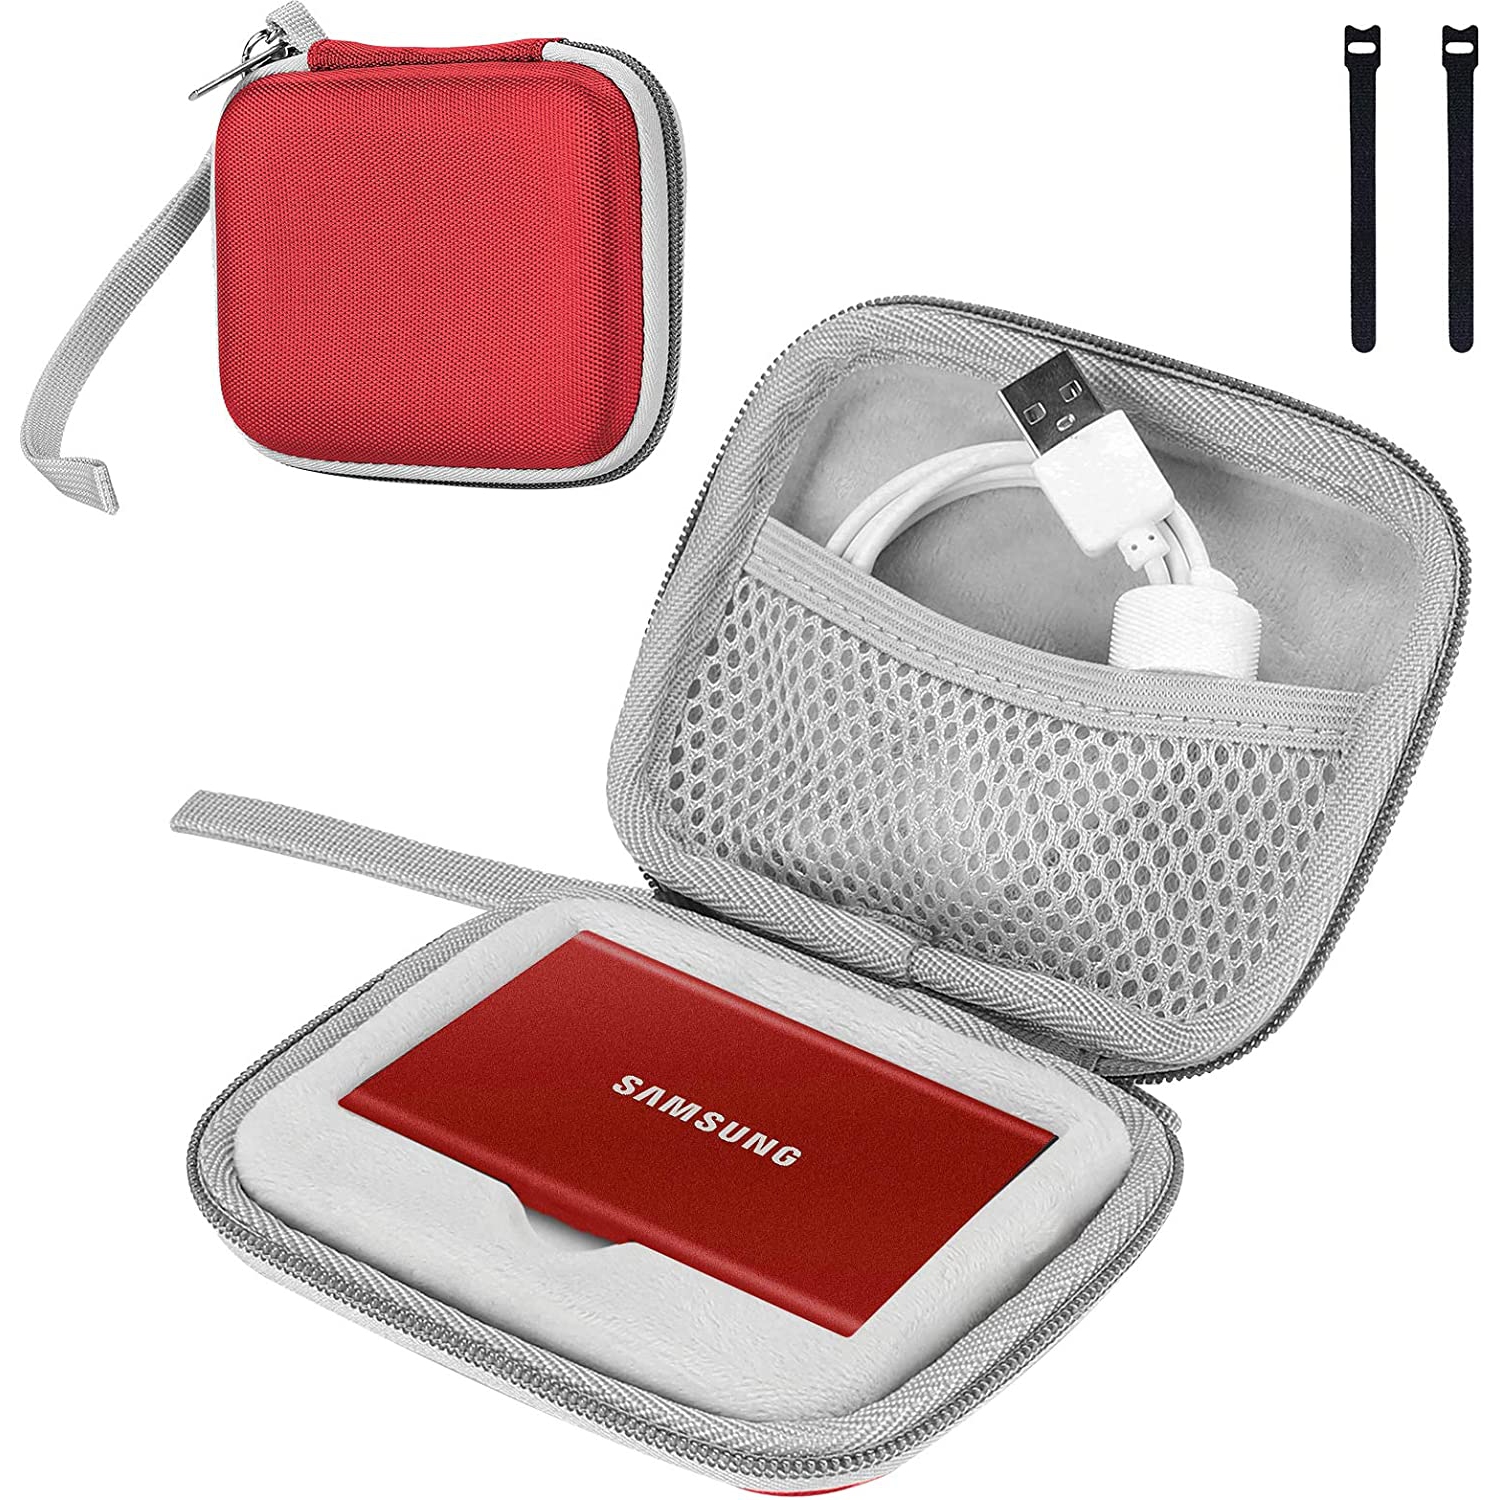 Samsung T7/ T7 Touch Portable SSD Hard Carrying Case and 2 Cable Ties, Hard EVA Shockproof Storage Travel Organizer for T7/ T7 Portable 500GB 1TB 2TB USB 3.2 External Solid